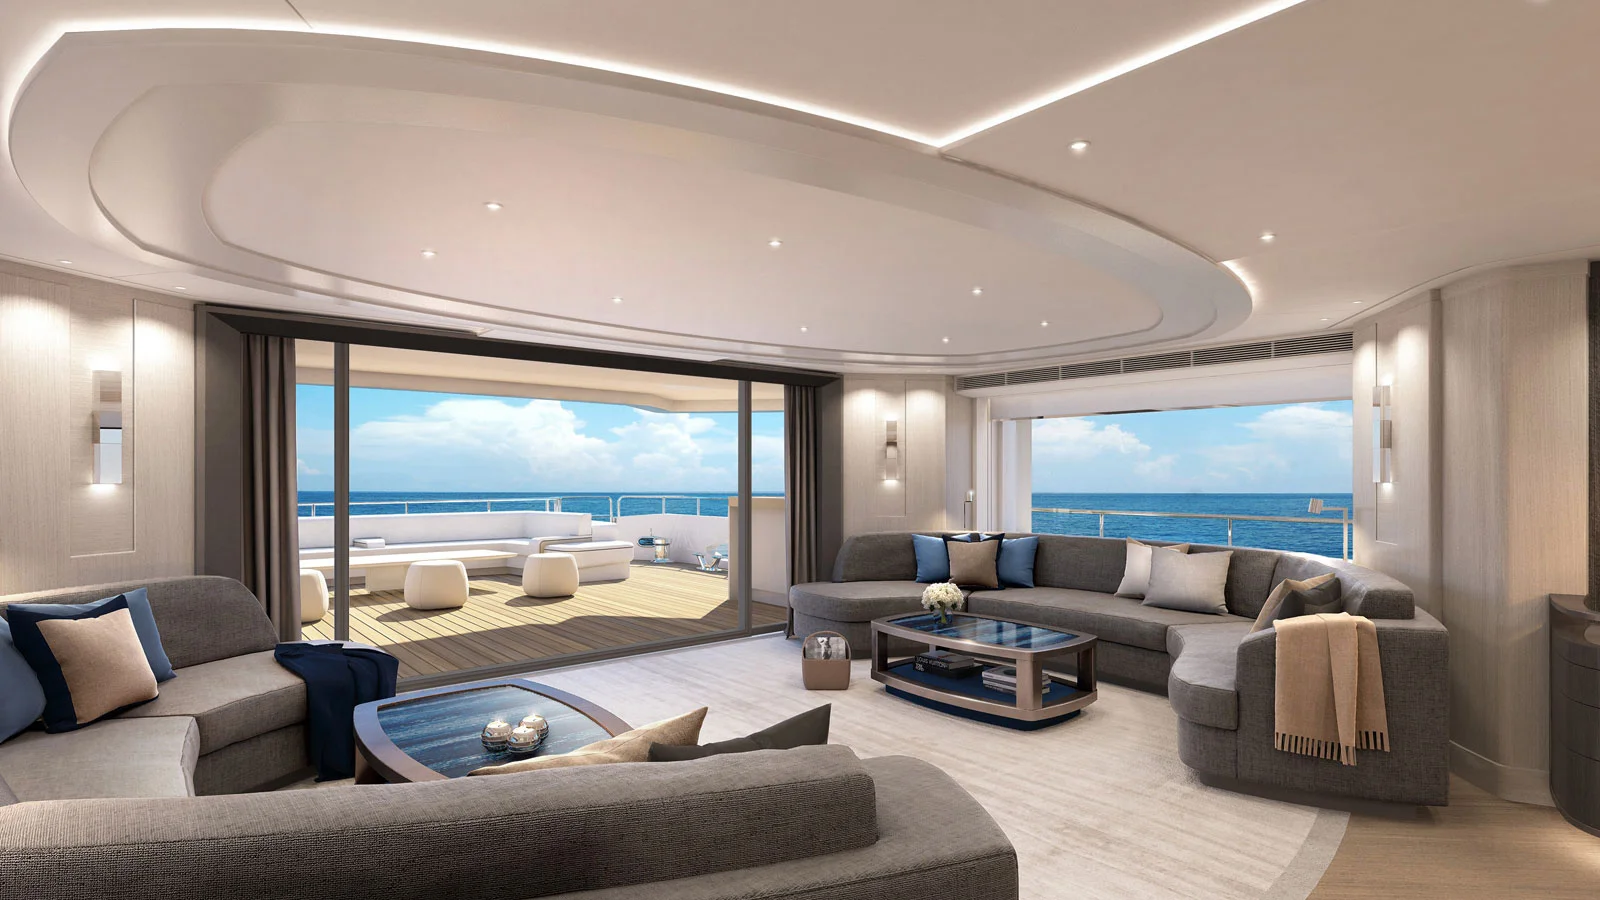 Lounge area on the main deck